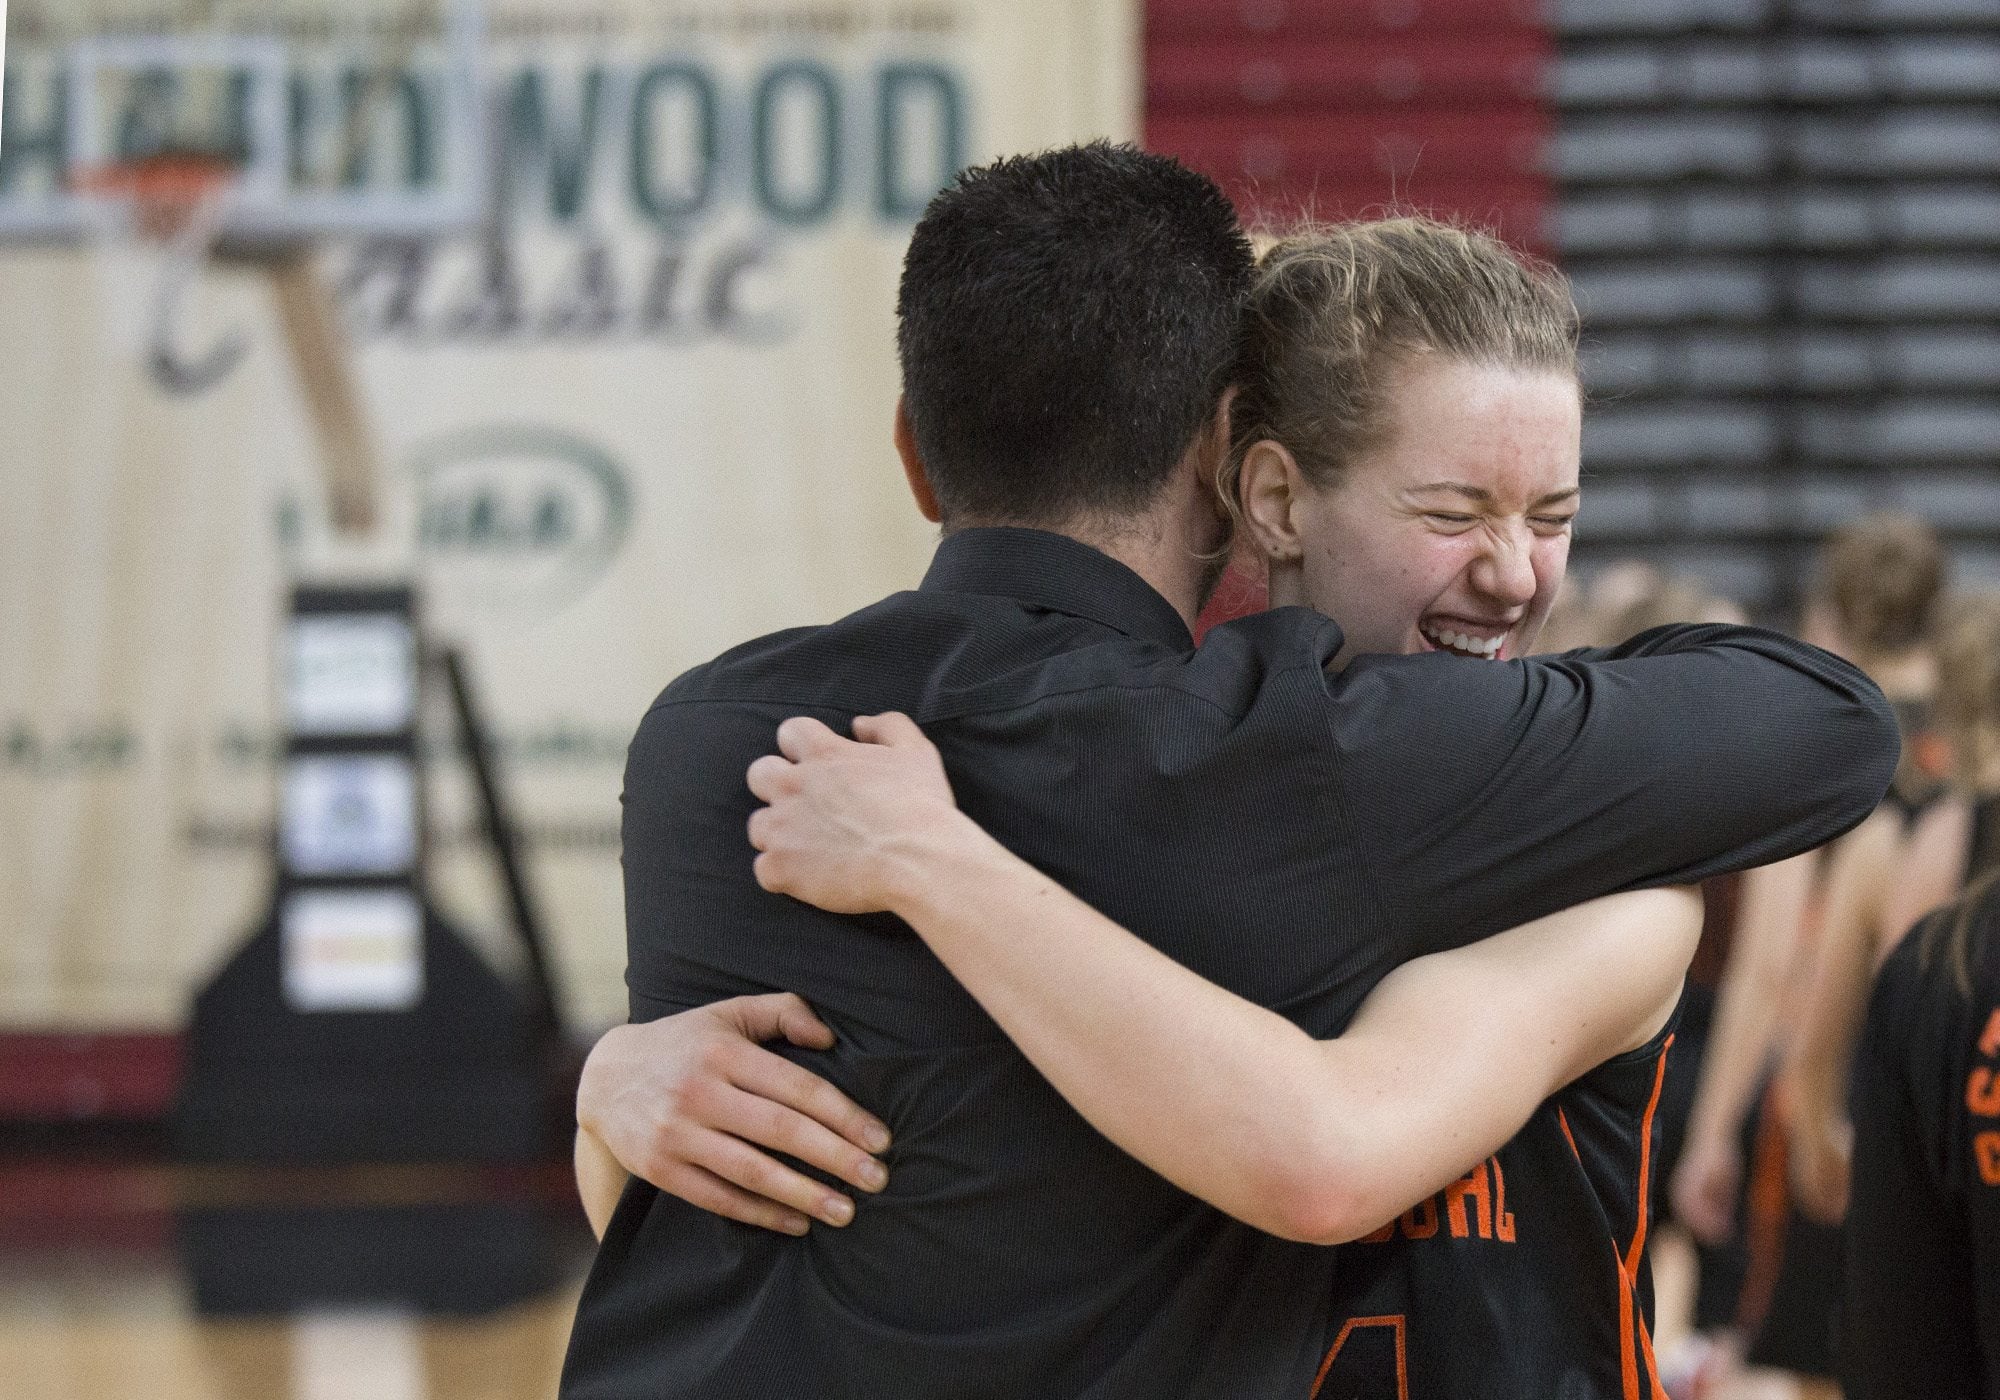 Washougal High School’s Raeann Allen hugs her coach Brian Oberg in celebration after Washougal beat Black Hills High School 50-28 in the class 2A girls Hardwood Classic state basketball tournament March 5, 2016 in the Yakima SunDome in Yakima, Wash. The win earned Washougal fourth place in the tournament.